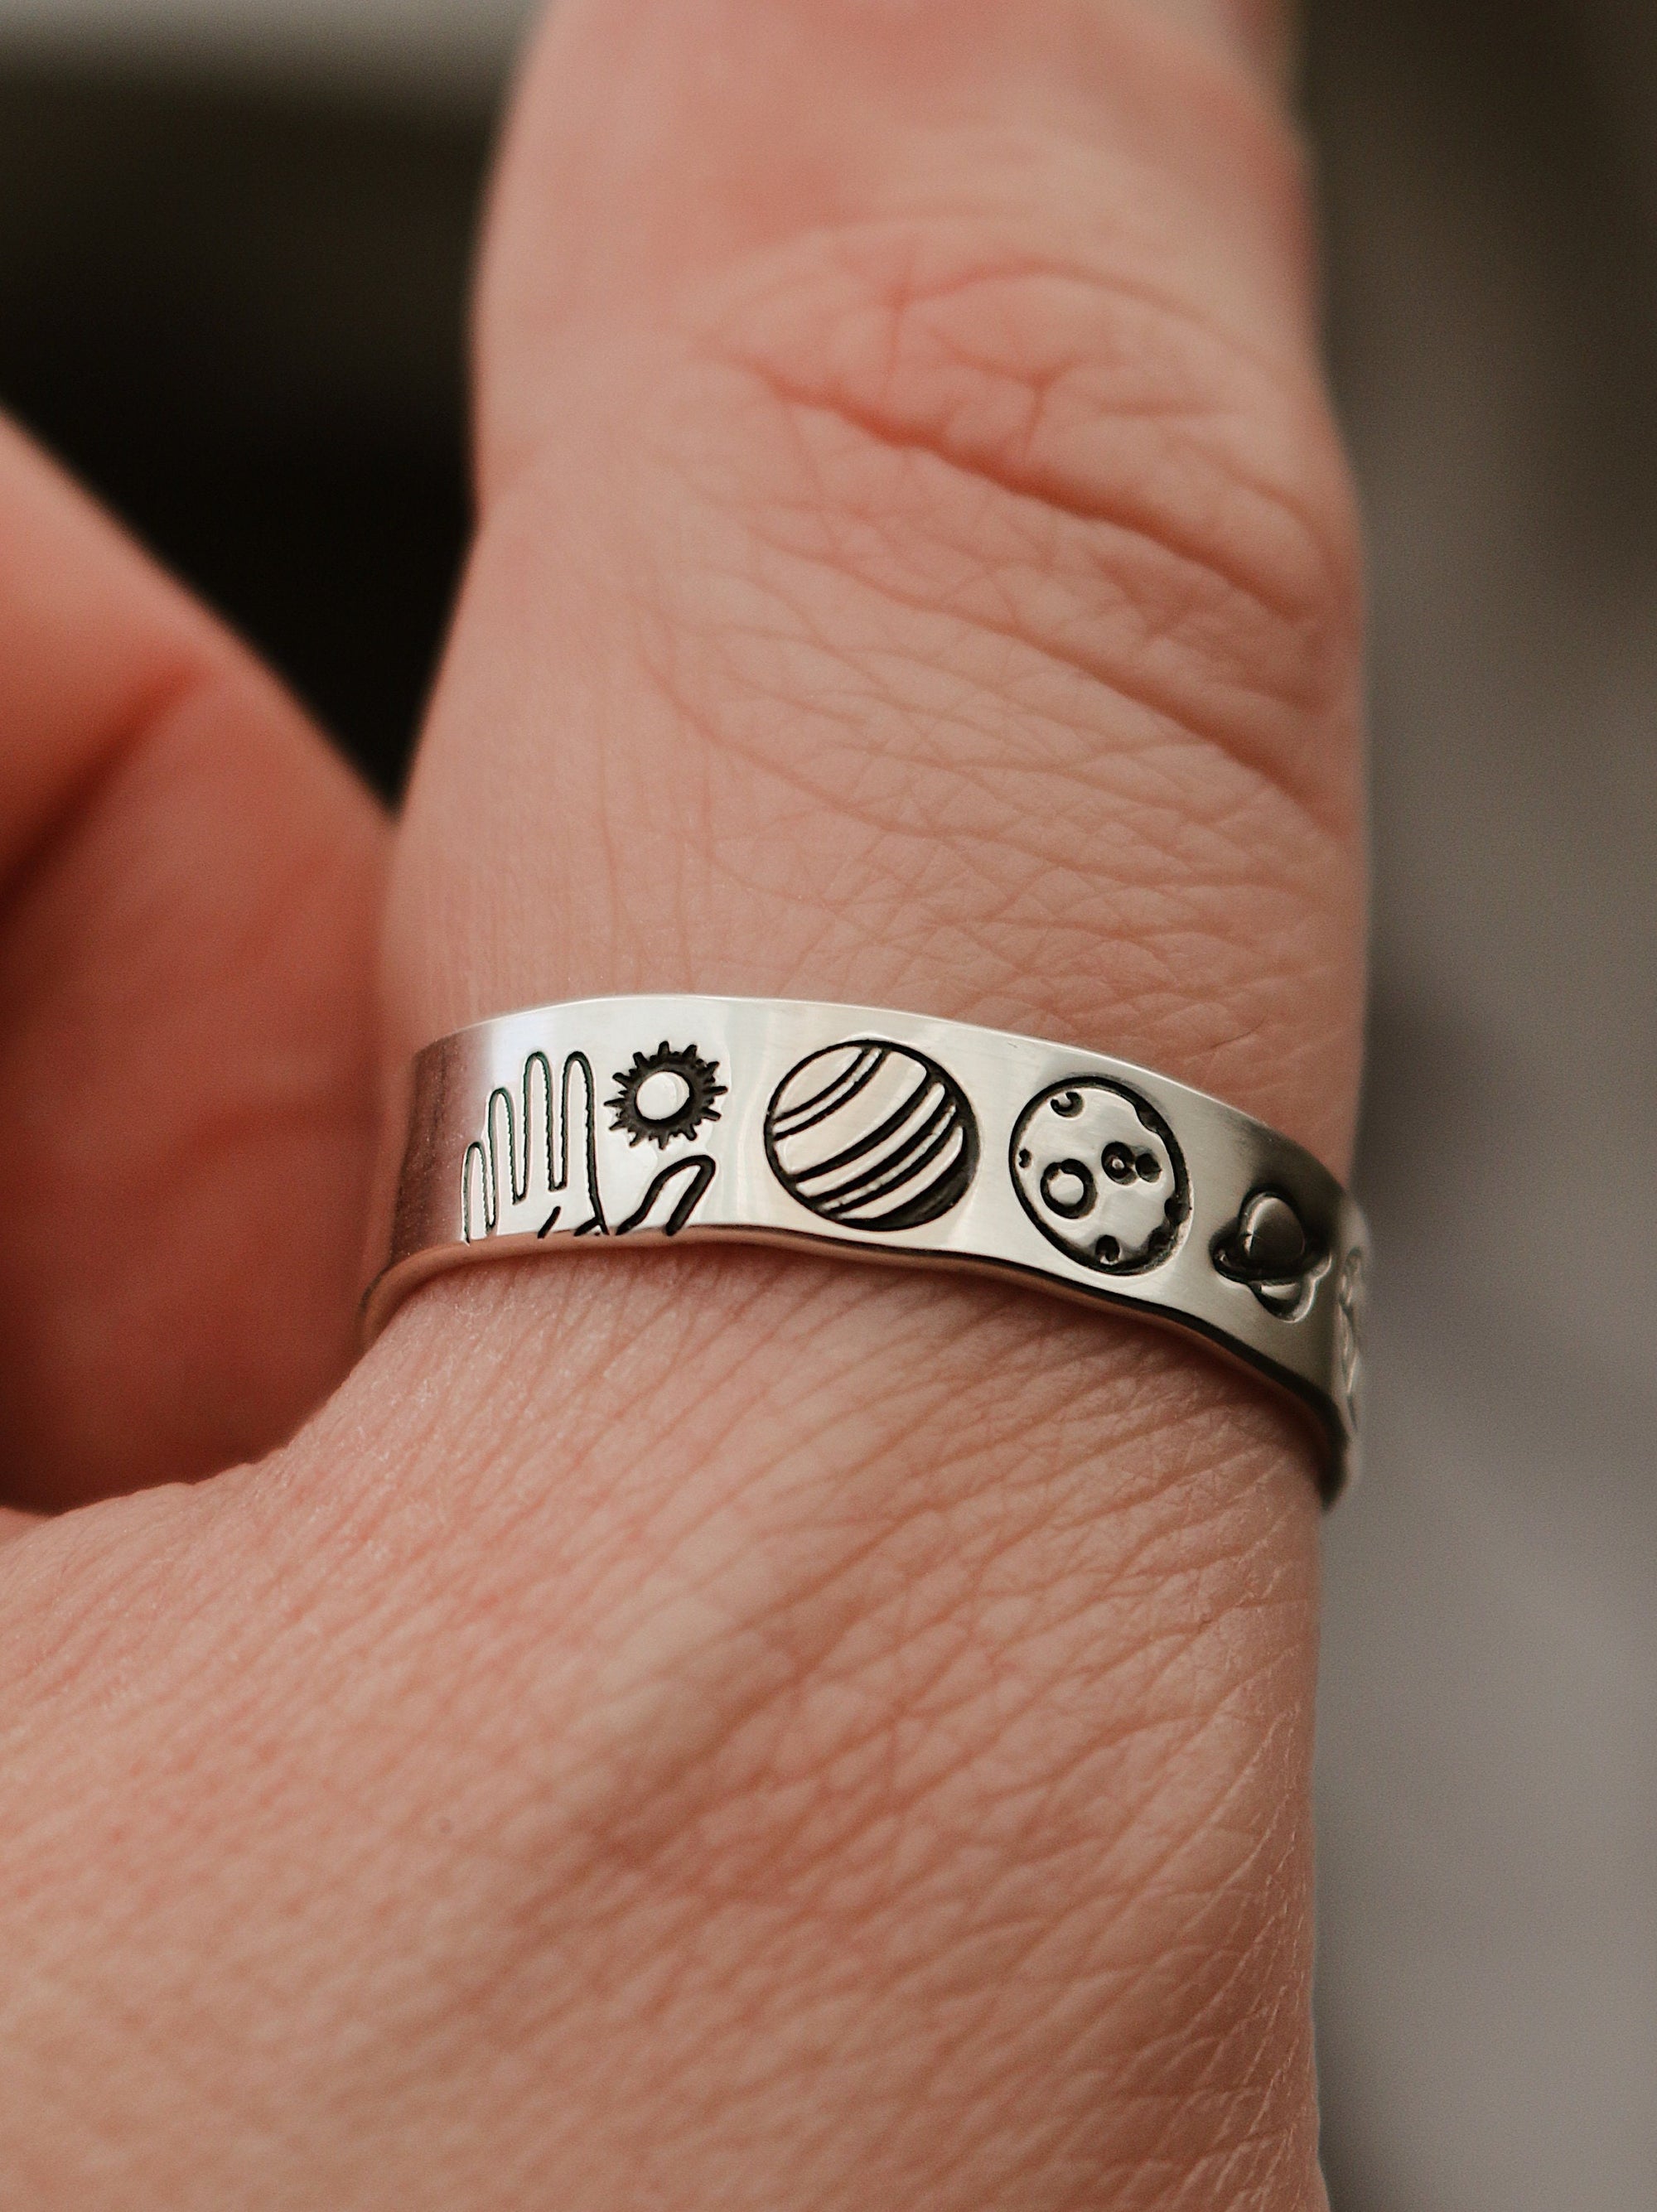 Solar System Ring | Planets Jewelry | Sun and Moon Ring | Best Friend Birthday Gift | Space Lover Jewelry | Celestial Ring | Astronomical